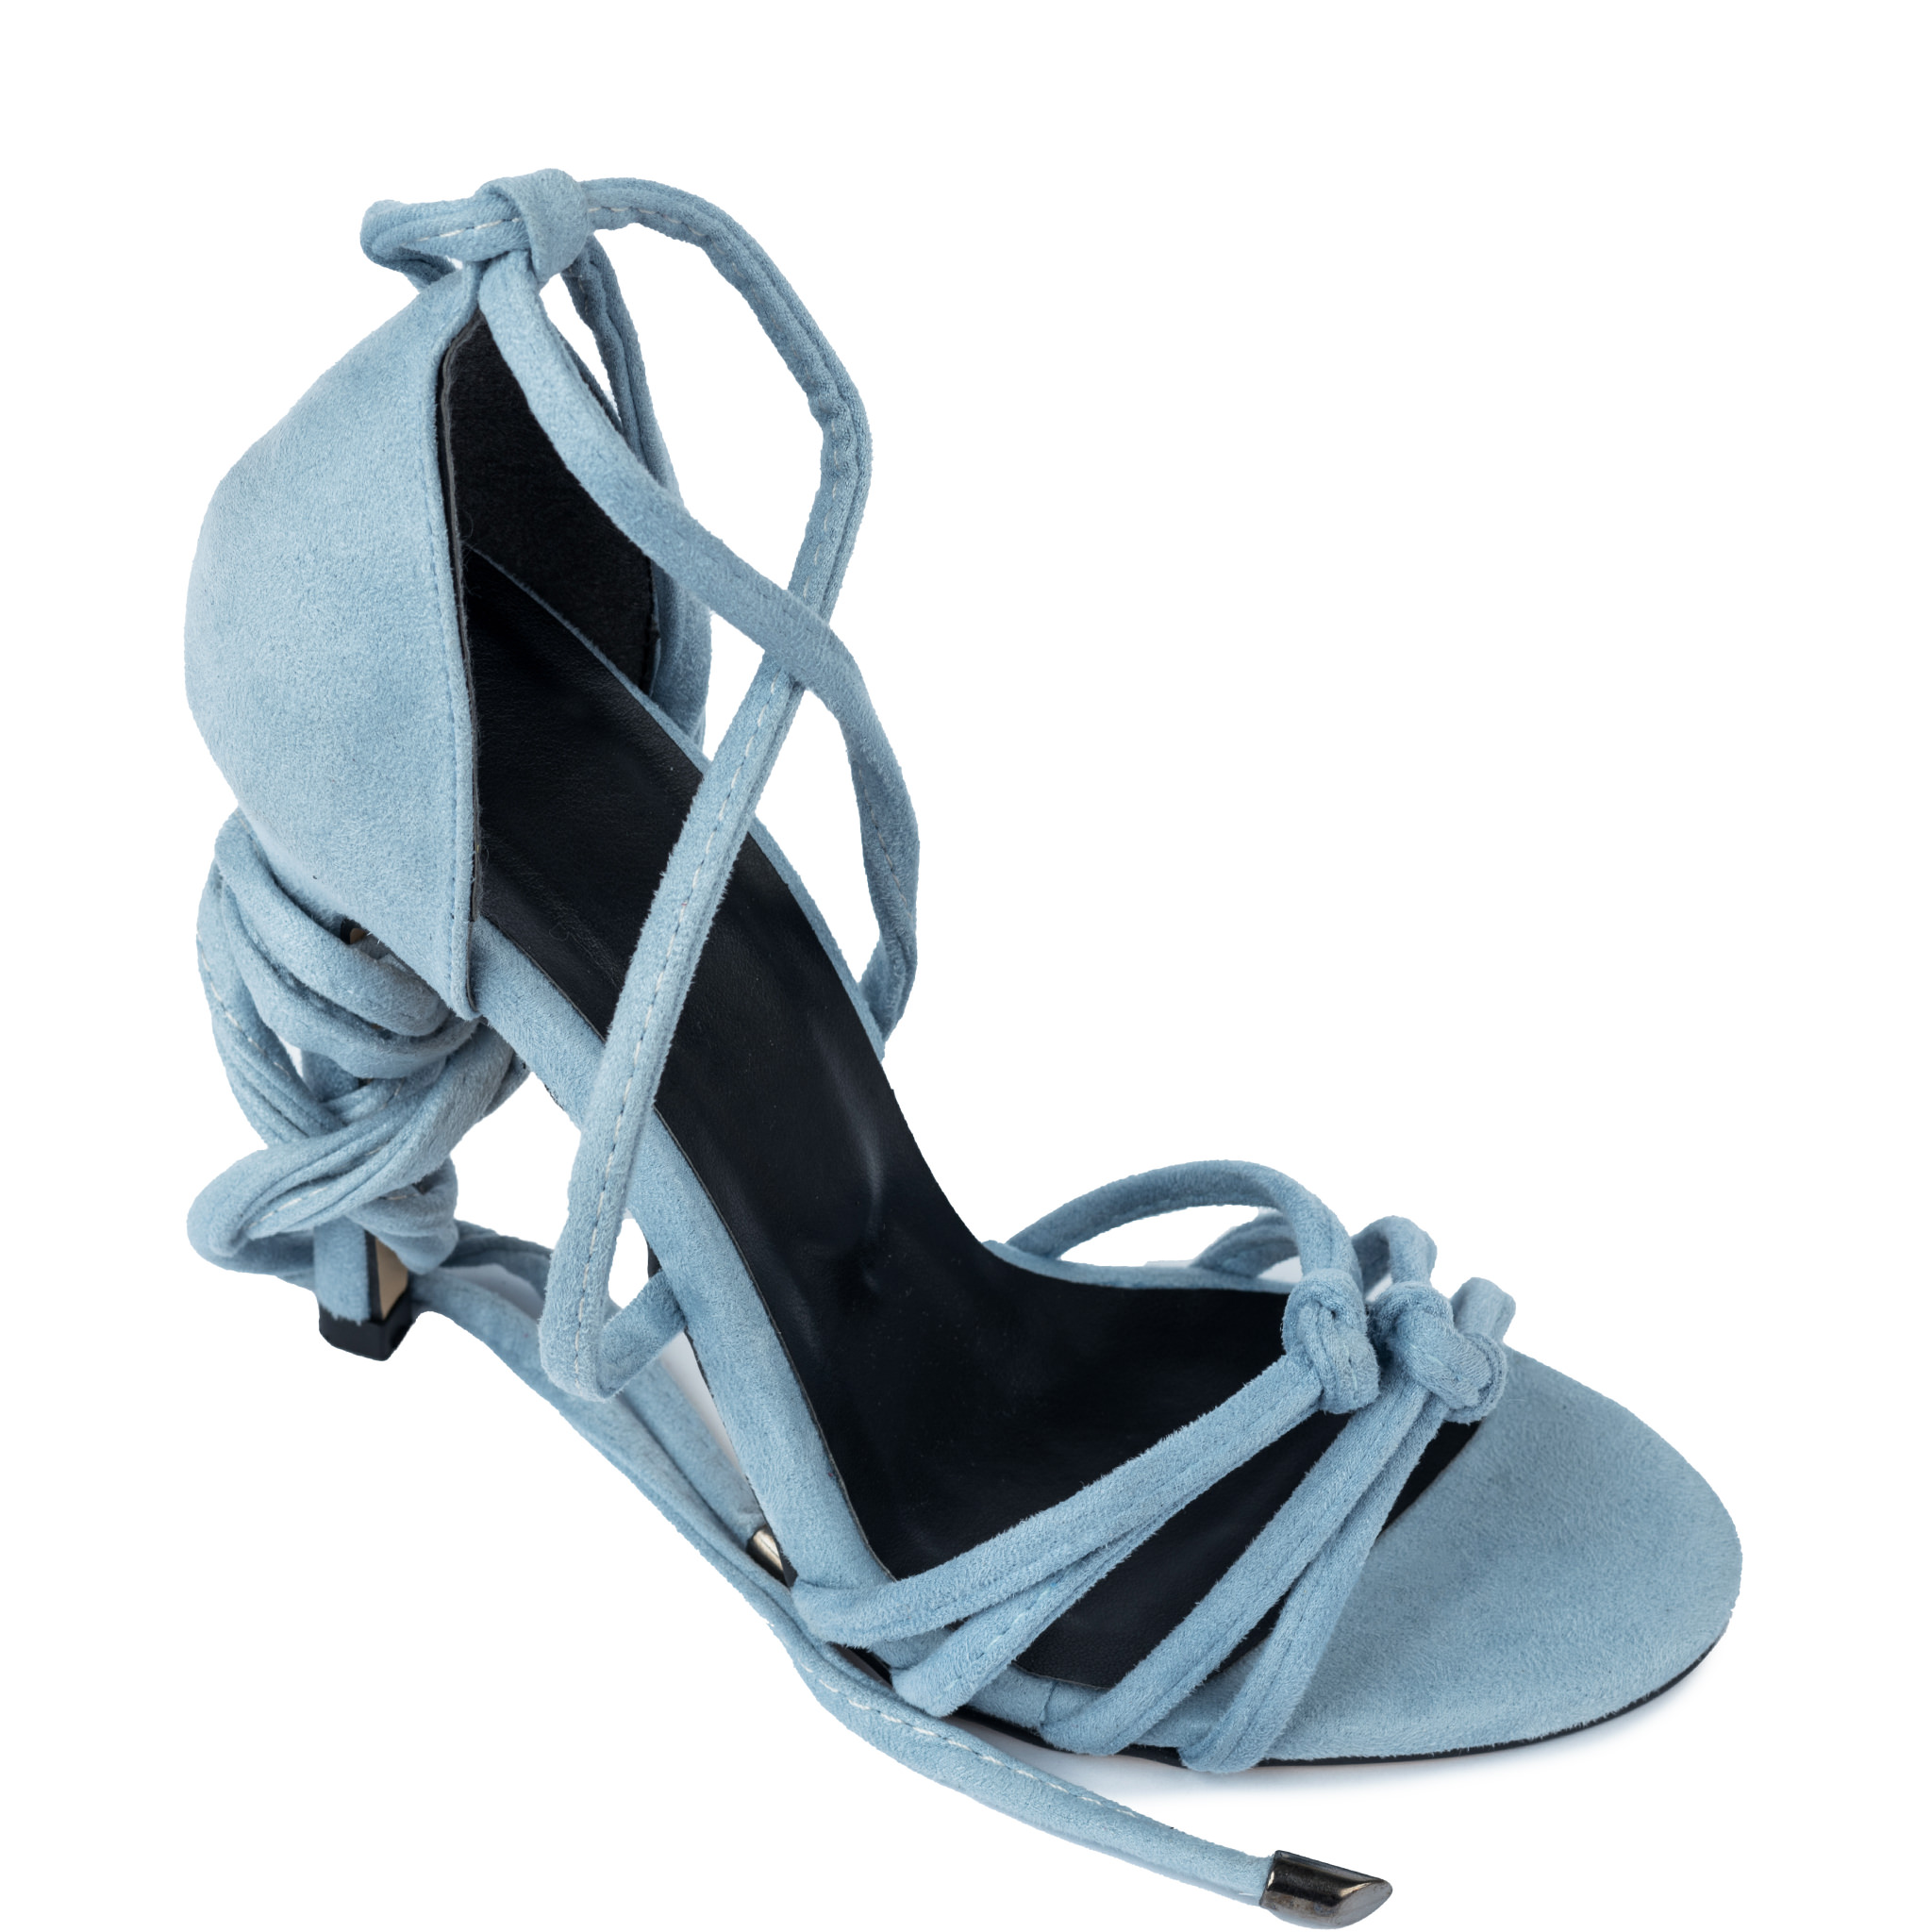 VELOUR LACE UP SANDALS WITH THIN HEEL - BLUE